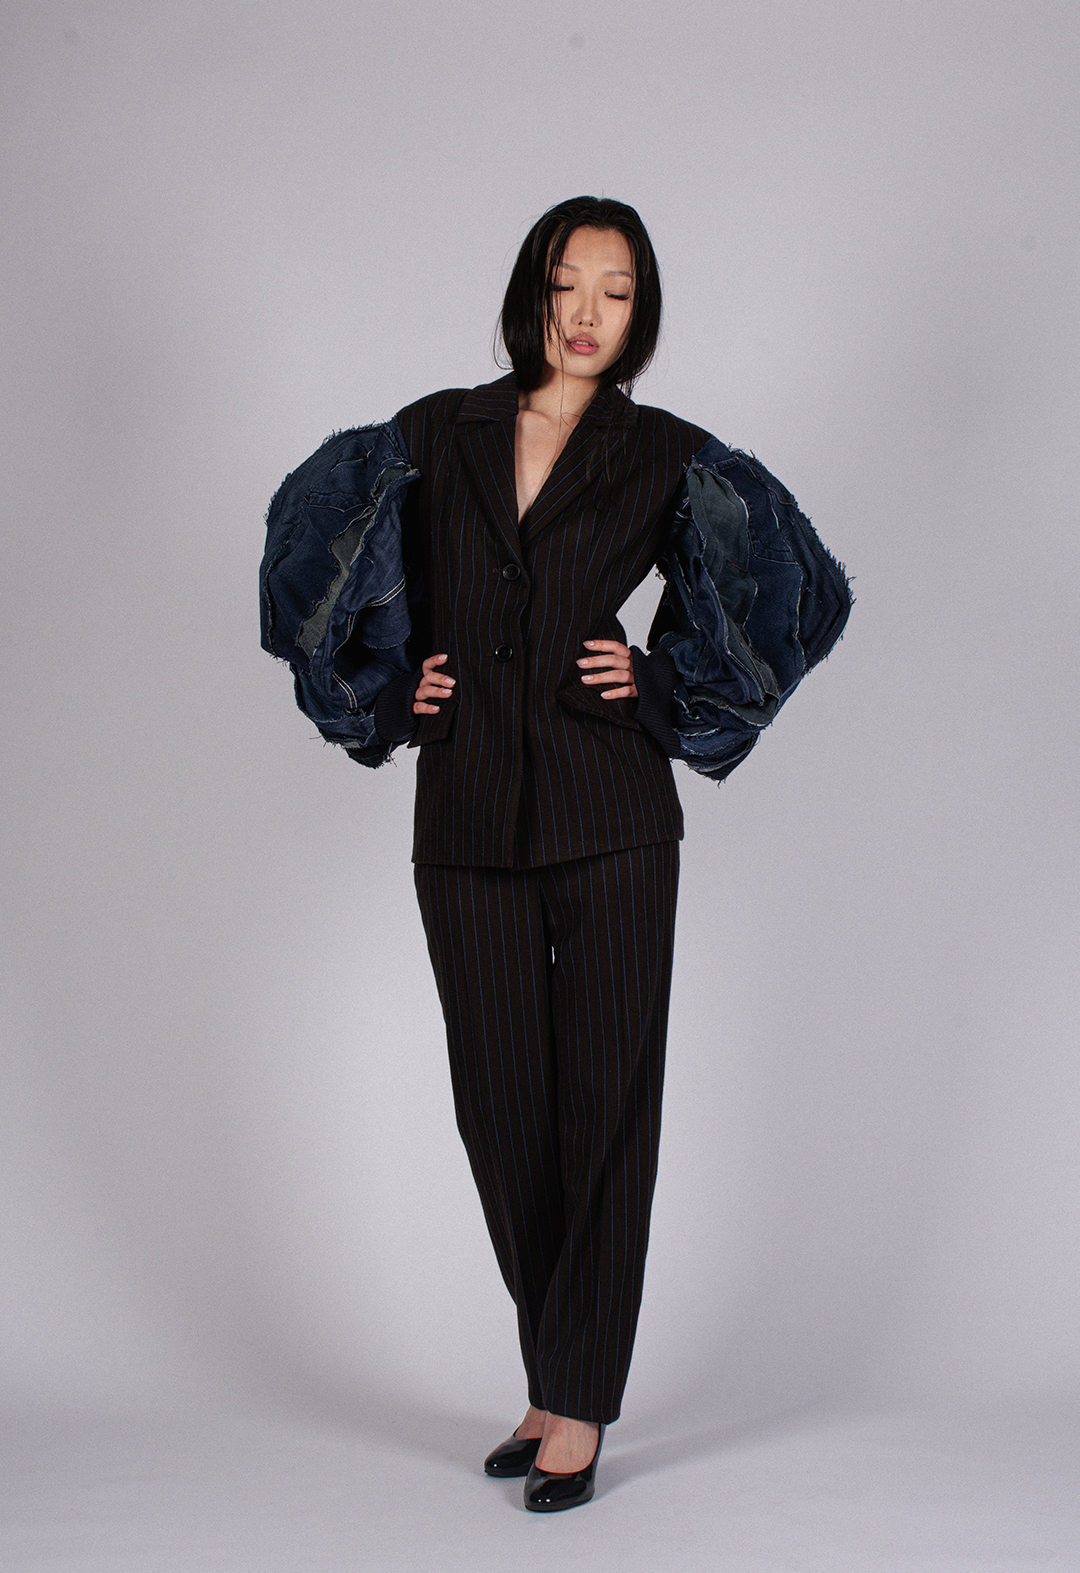 Front view of a model wearing the jacket. The jacket's oversized vintage denim sleeves matched with a pinstripe suit convey the idea of different memories connected together.